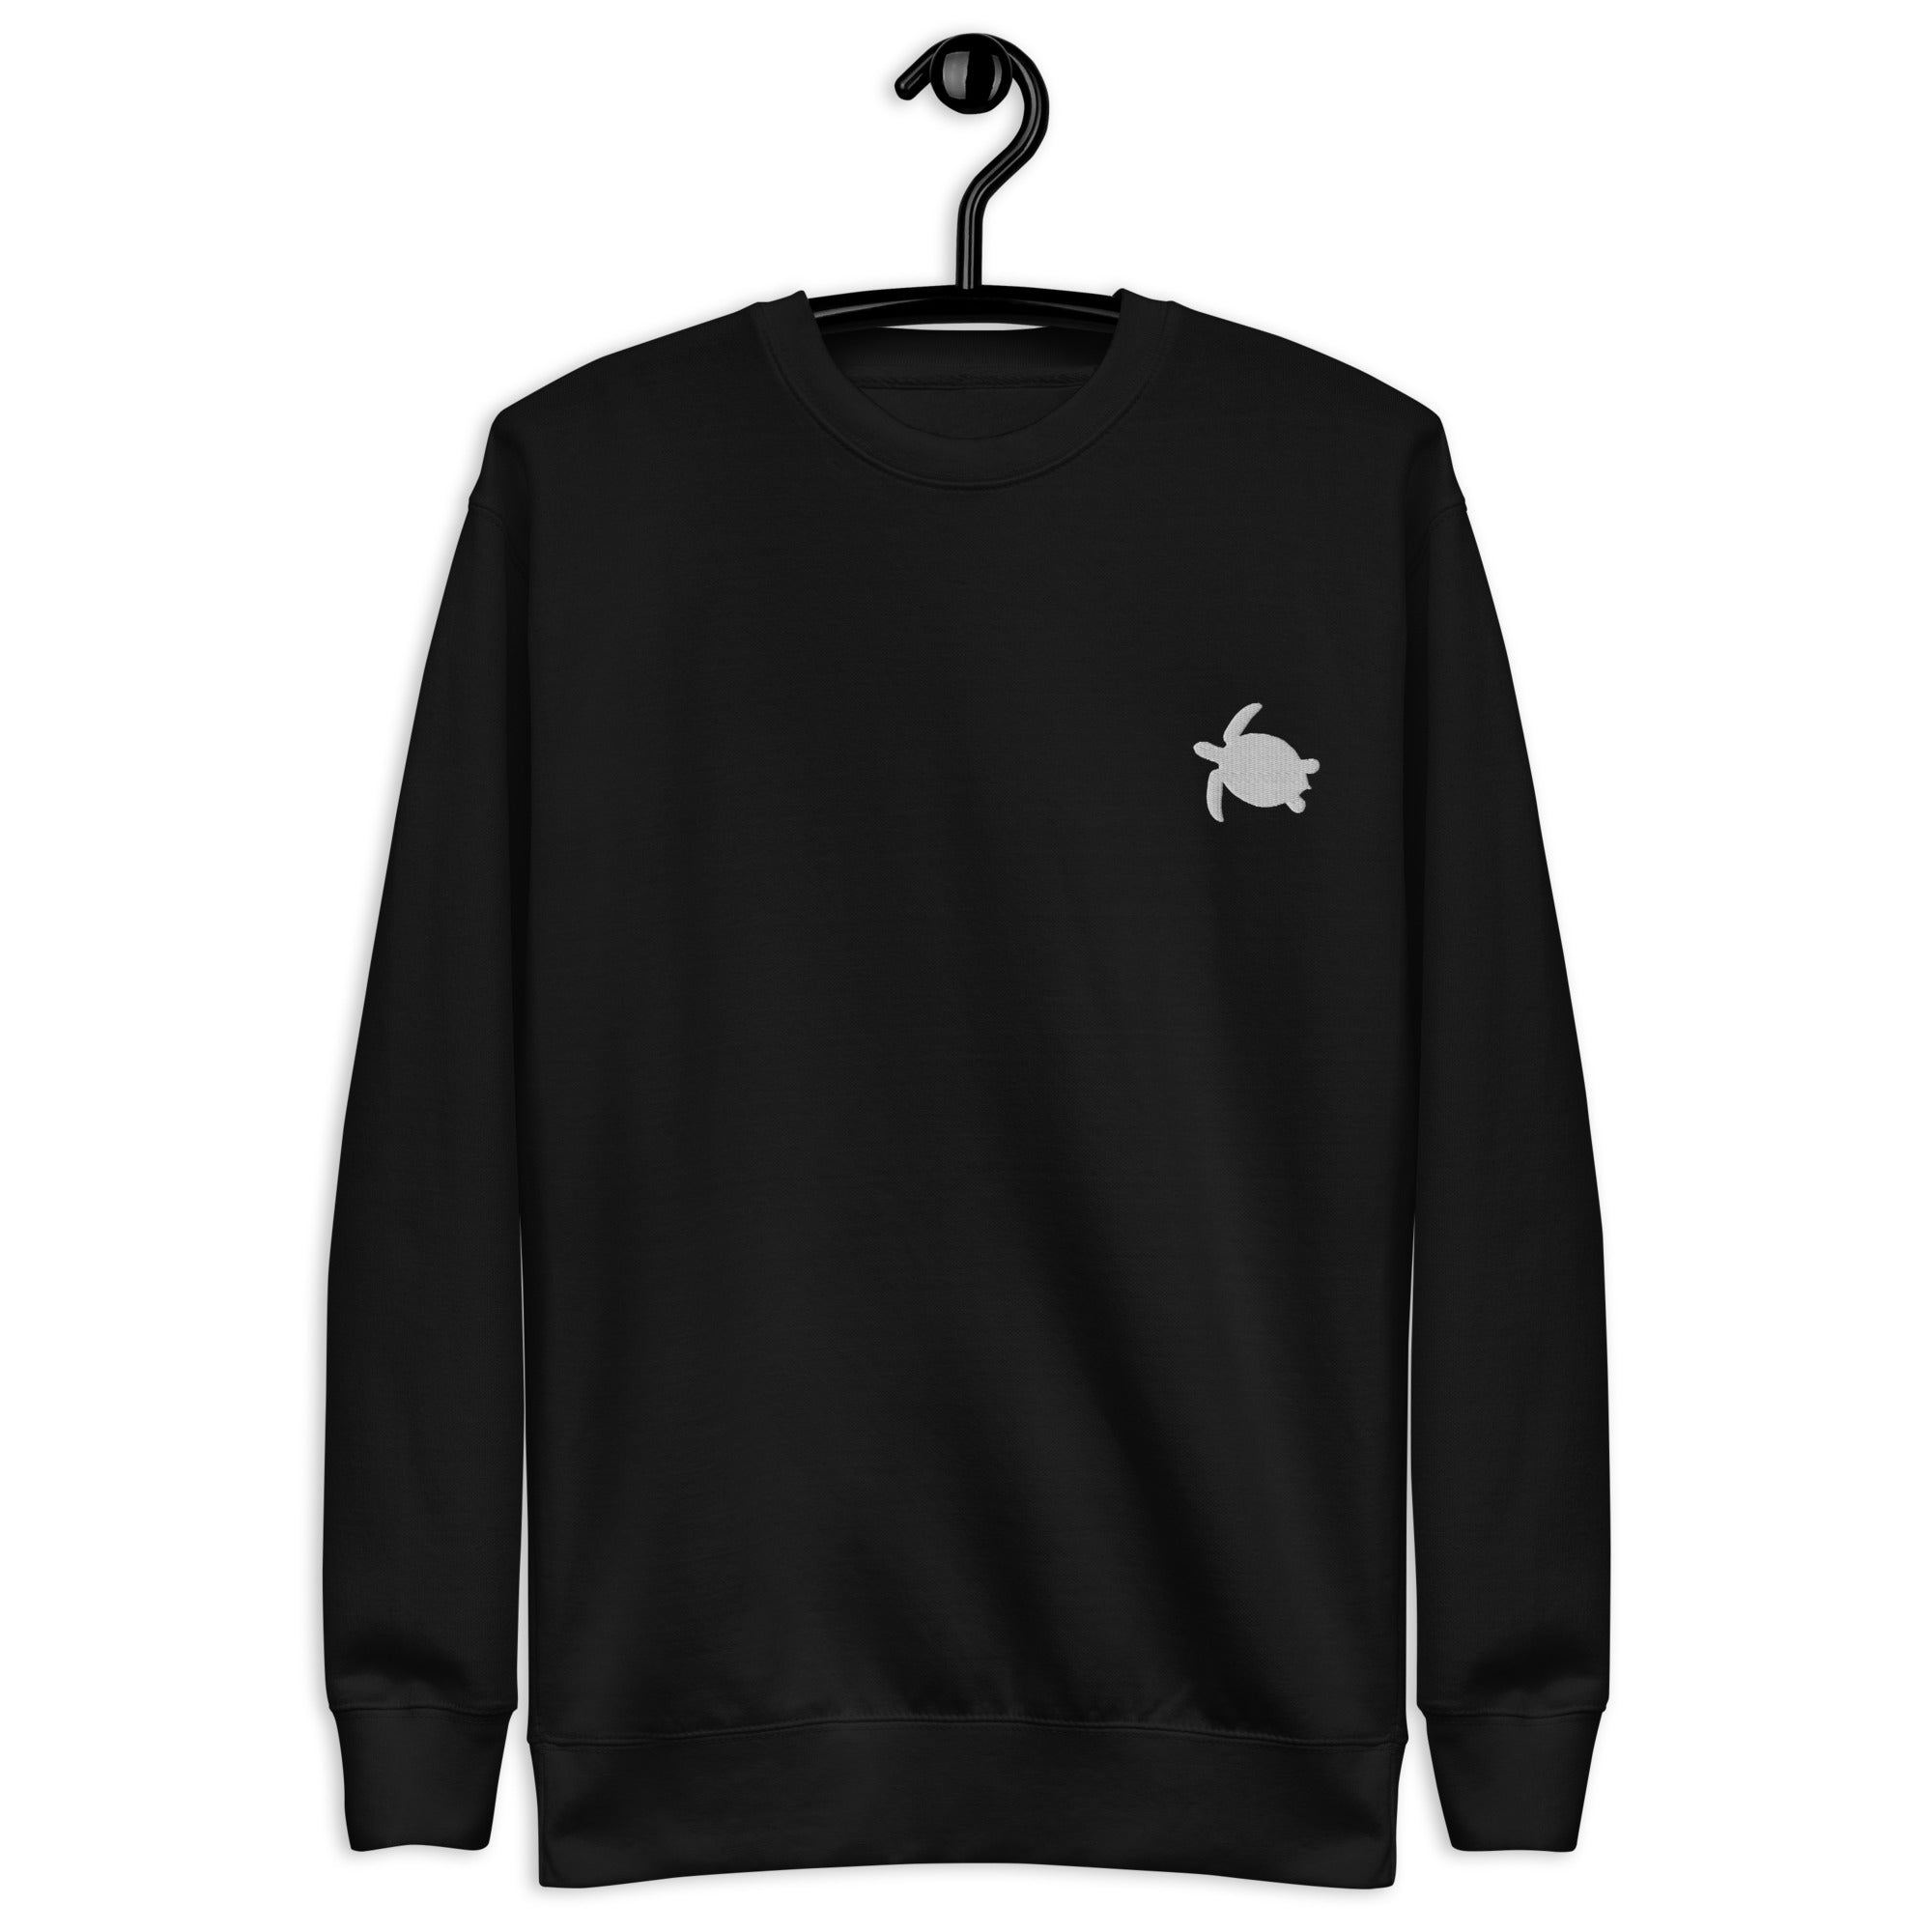 The Wise Tortoise Embroidered Crewneck